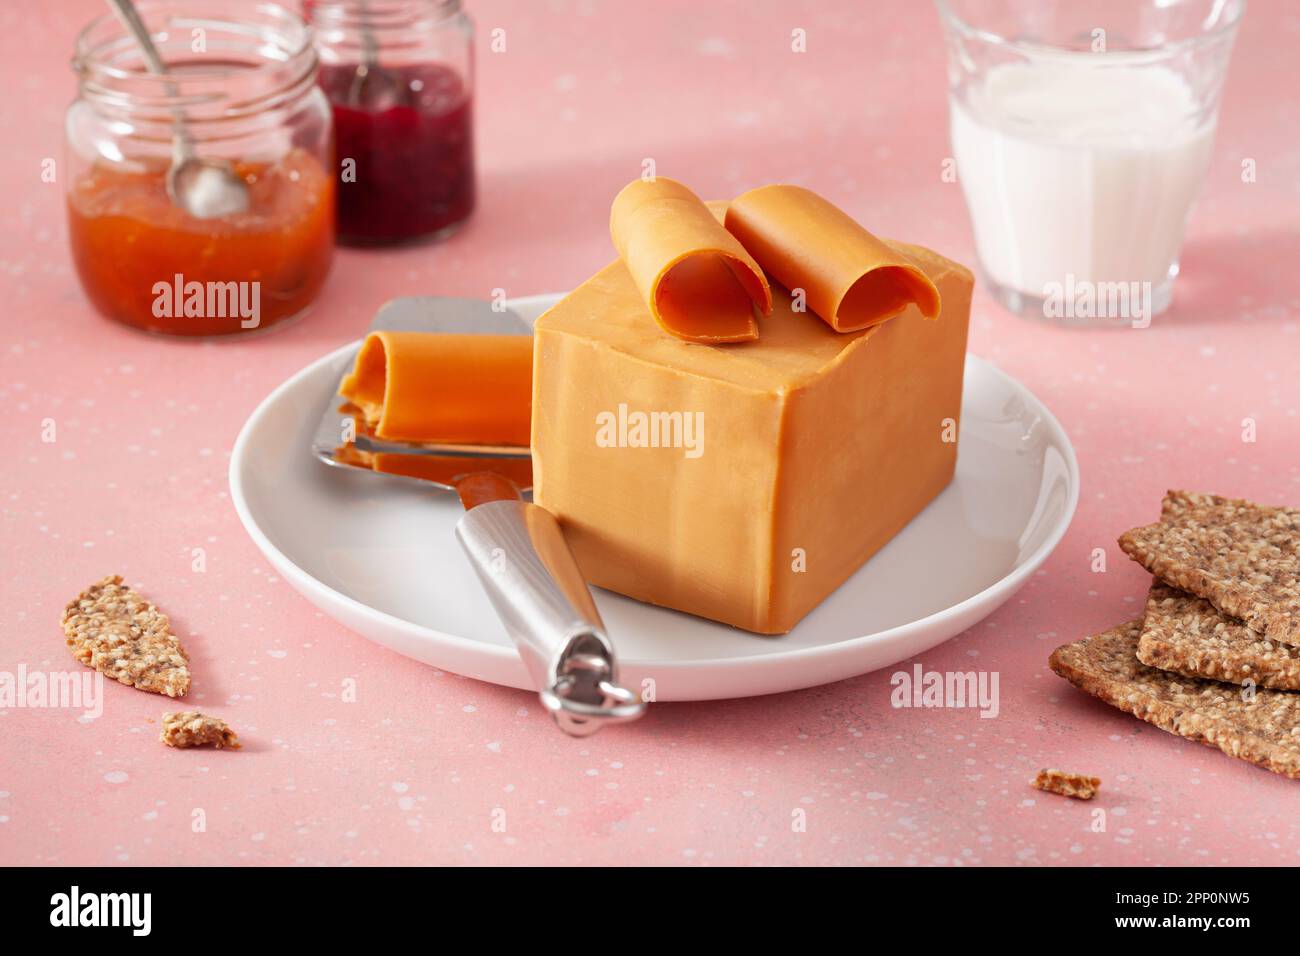 https://c8.alamy.com/comp/2PP0NW5/norwegian-brunost-traditional-brown-cheese-block-and-slicer-2PP0NW5.jpg